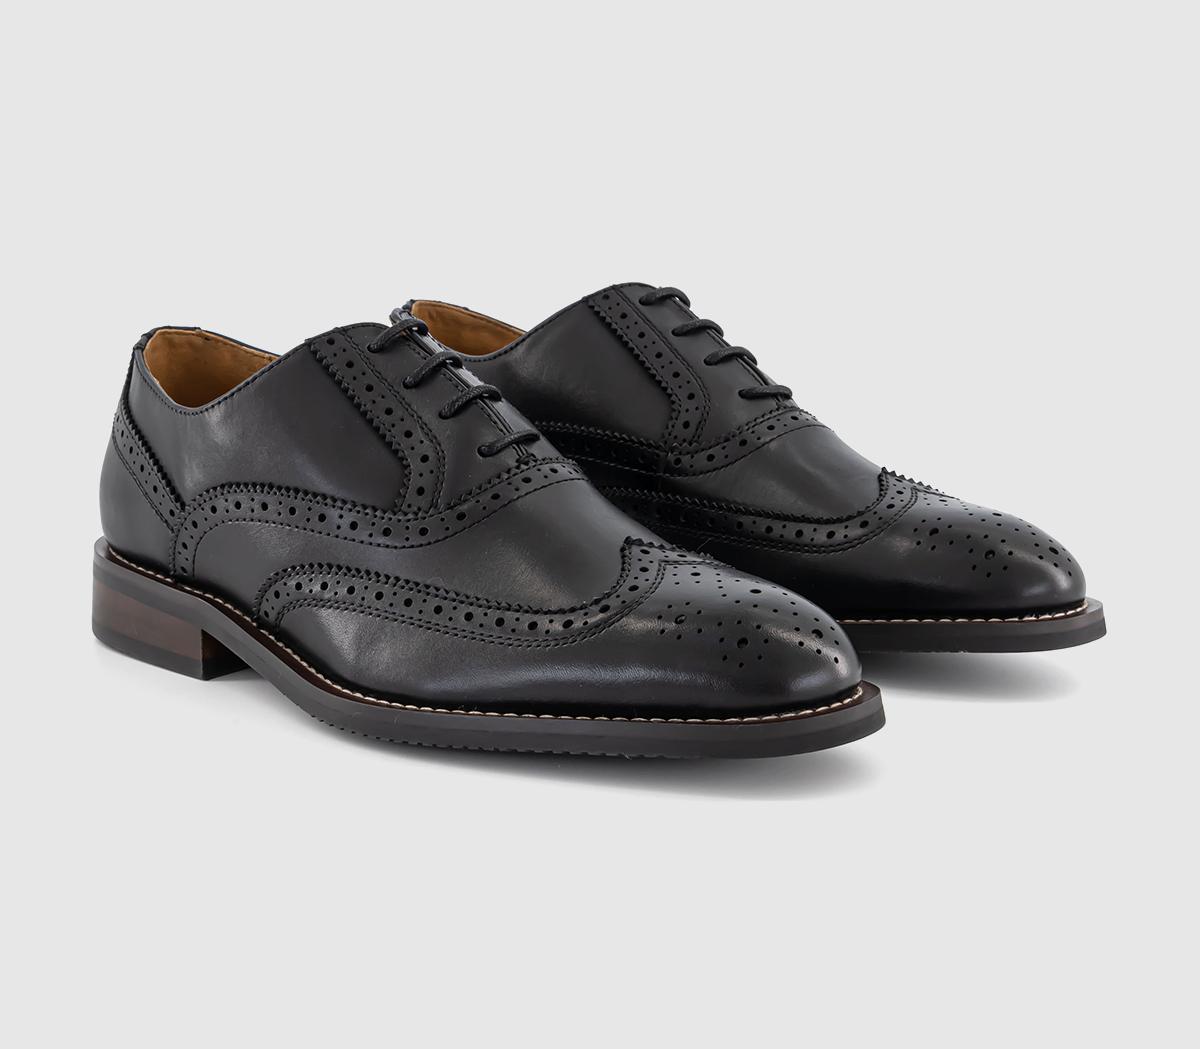 OFFICE Mens Mariner Wingcap Brogue Shoes Black Leather, 6